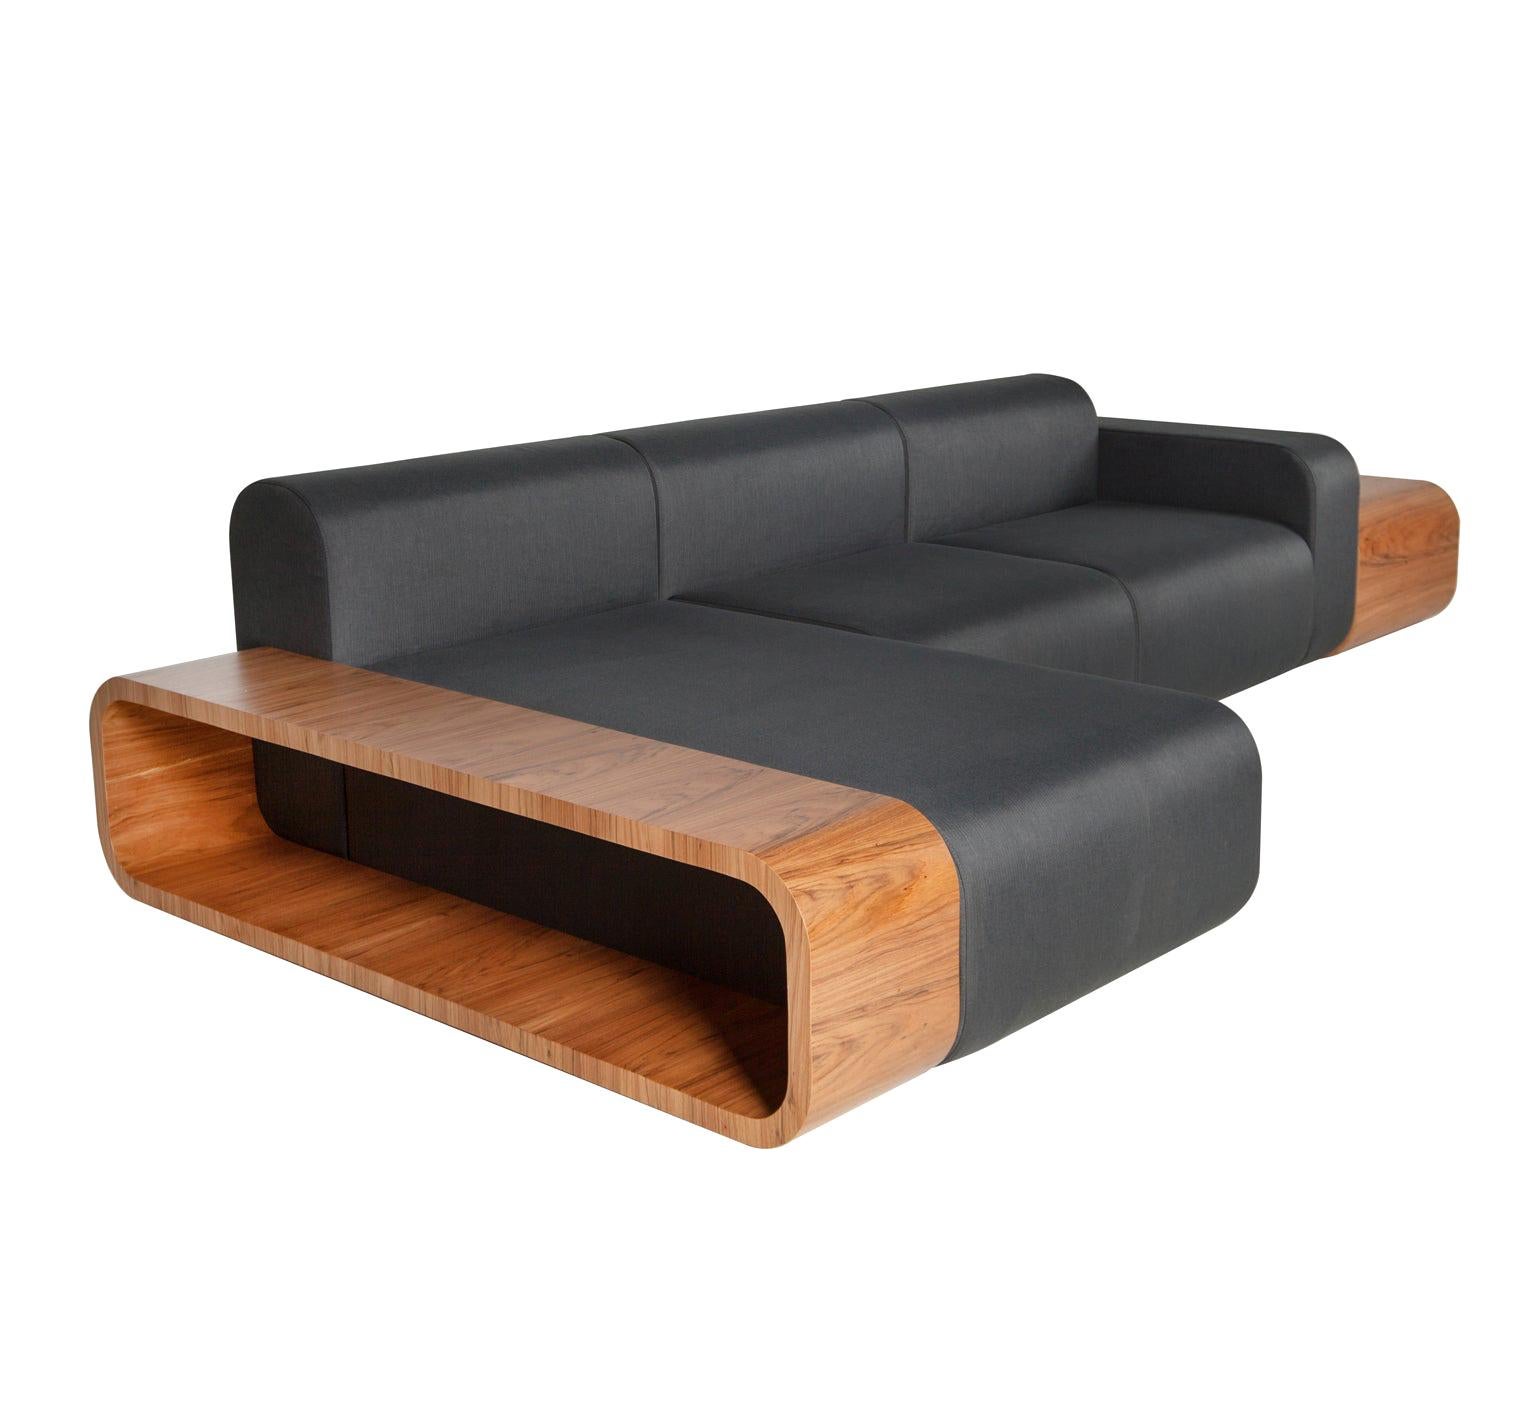 Riba Brazilian Contemporary Wood and Leather Sofa by Lattoog